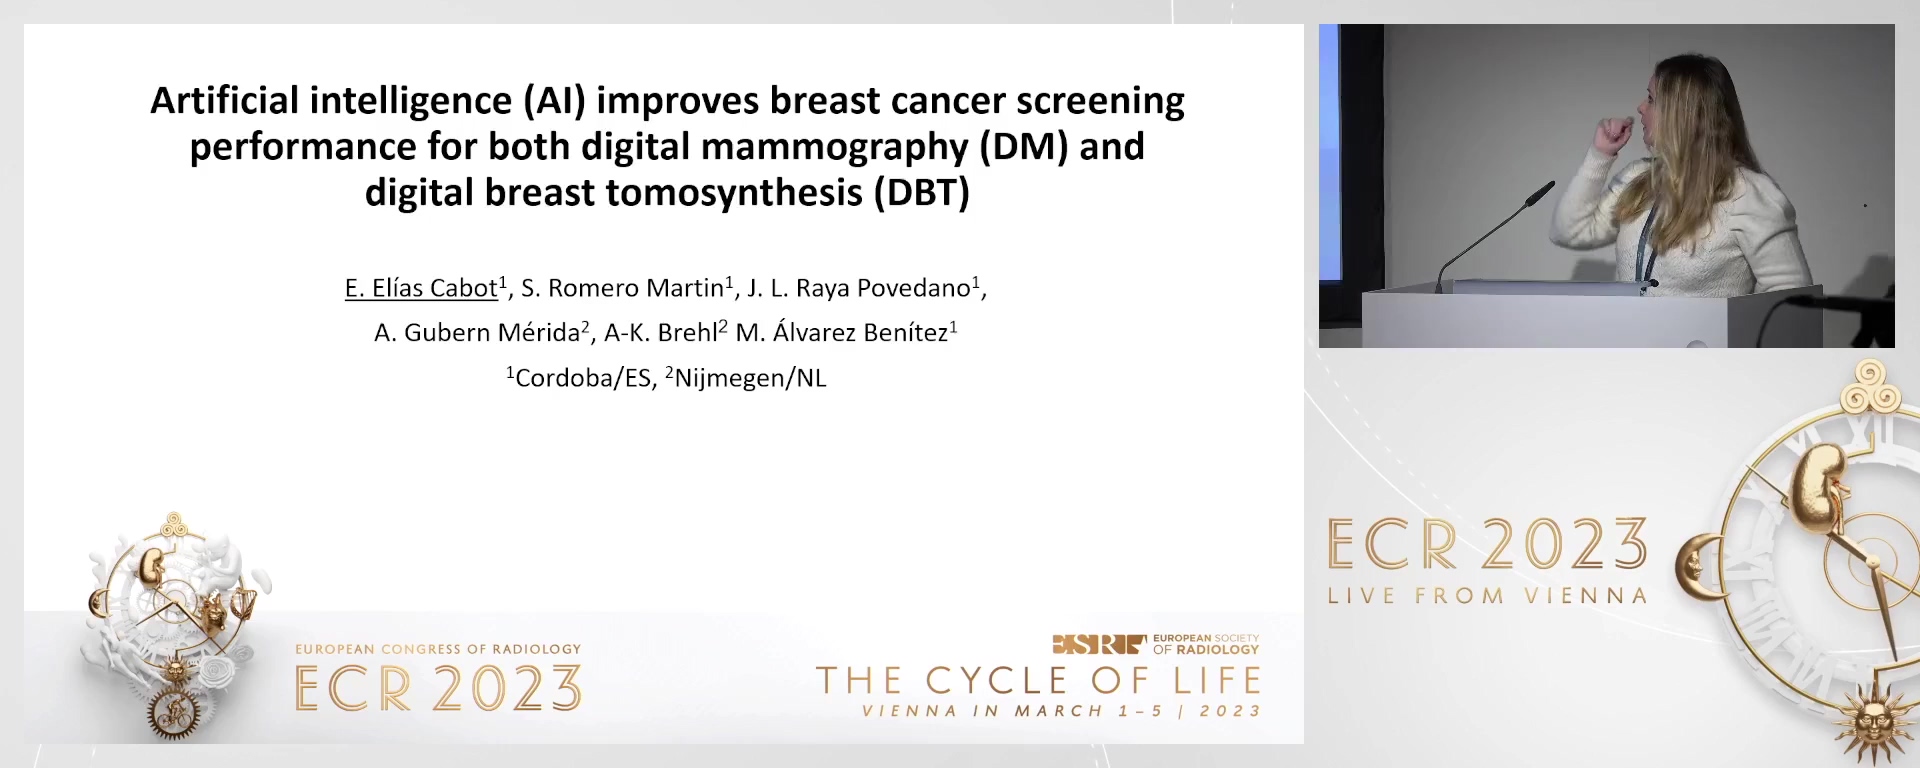 Artificial intelligence (AI) improves breast cancer screening performance for both digital mammography and digital breast tomosynthesis